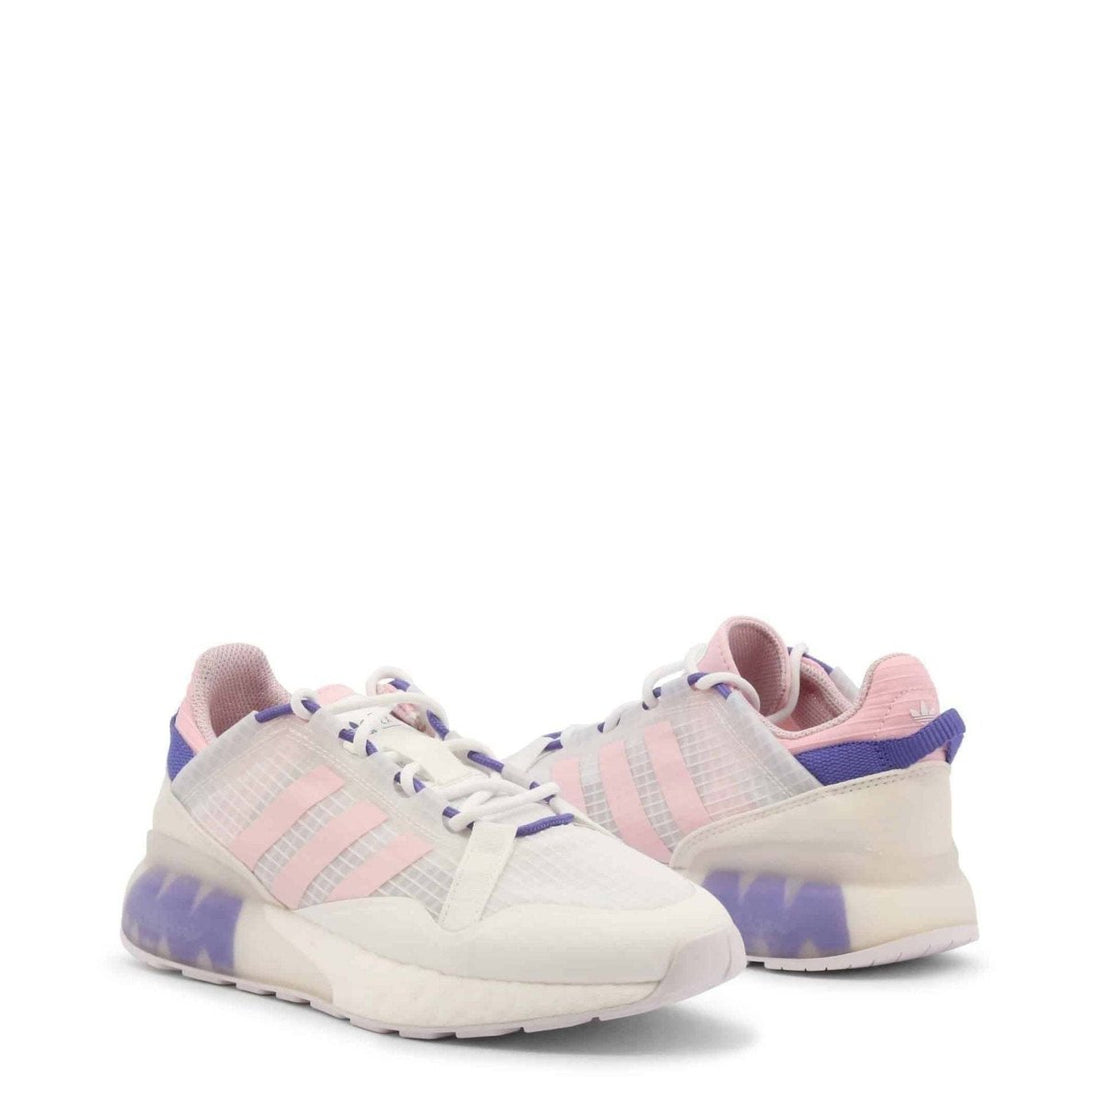 Adidas Sneakers - TINT - Sneakers - Adidas - GZ7874_ZX2K-Boost-Pure:349618